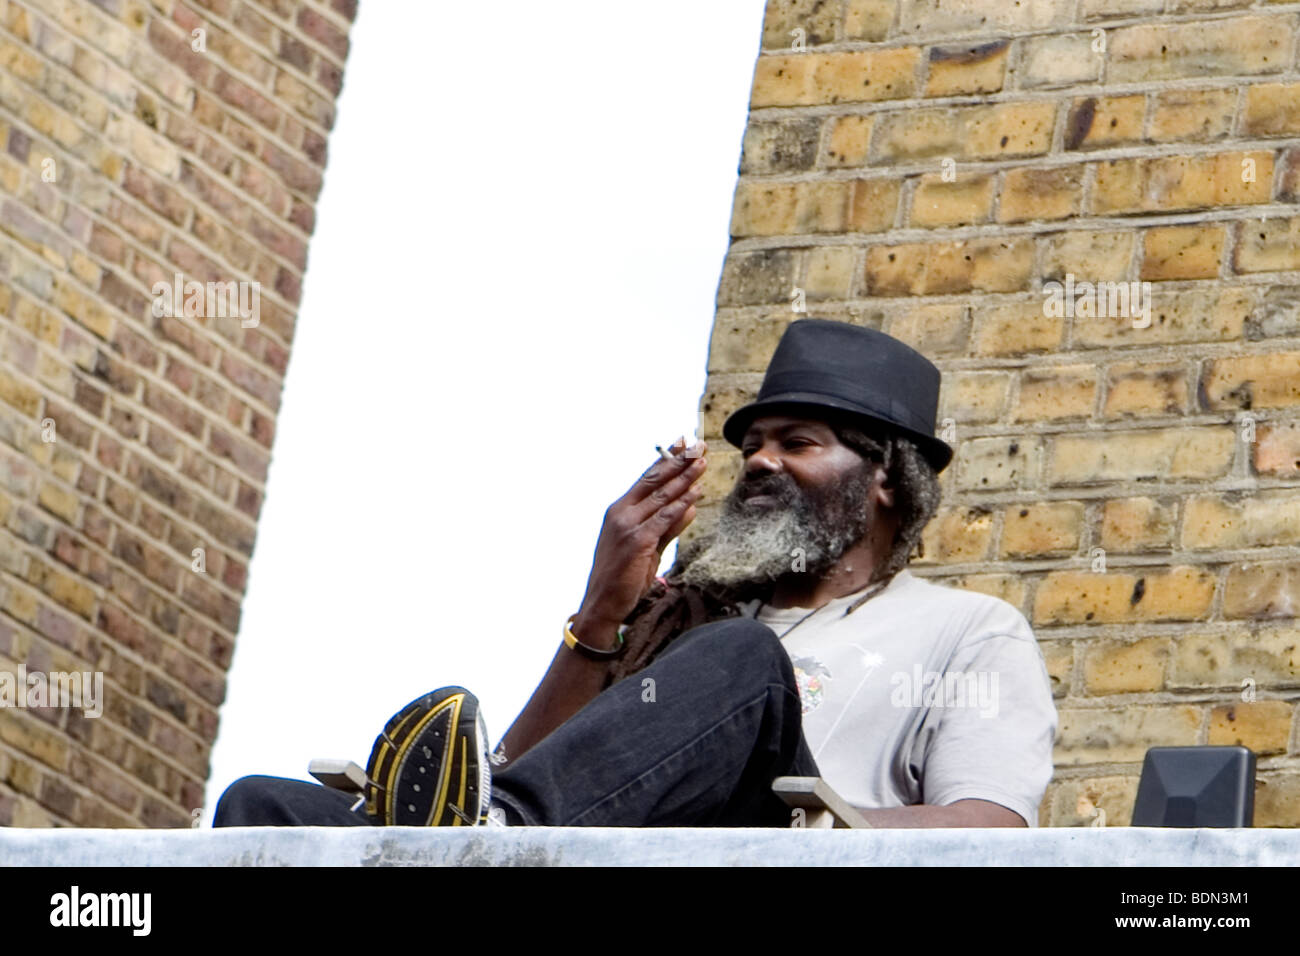 Jamaican man smoking joint on roof Stock Photo